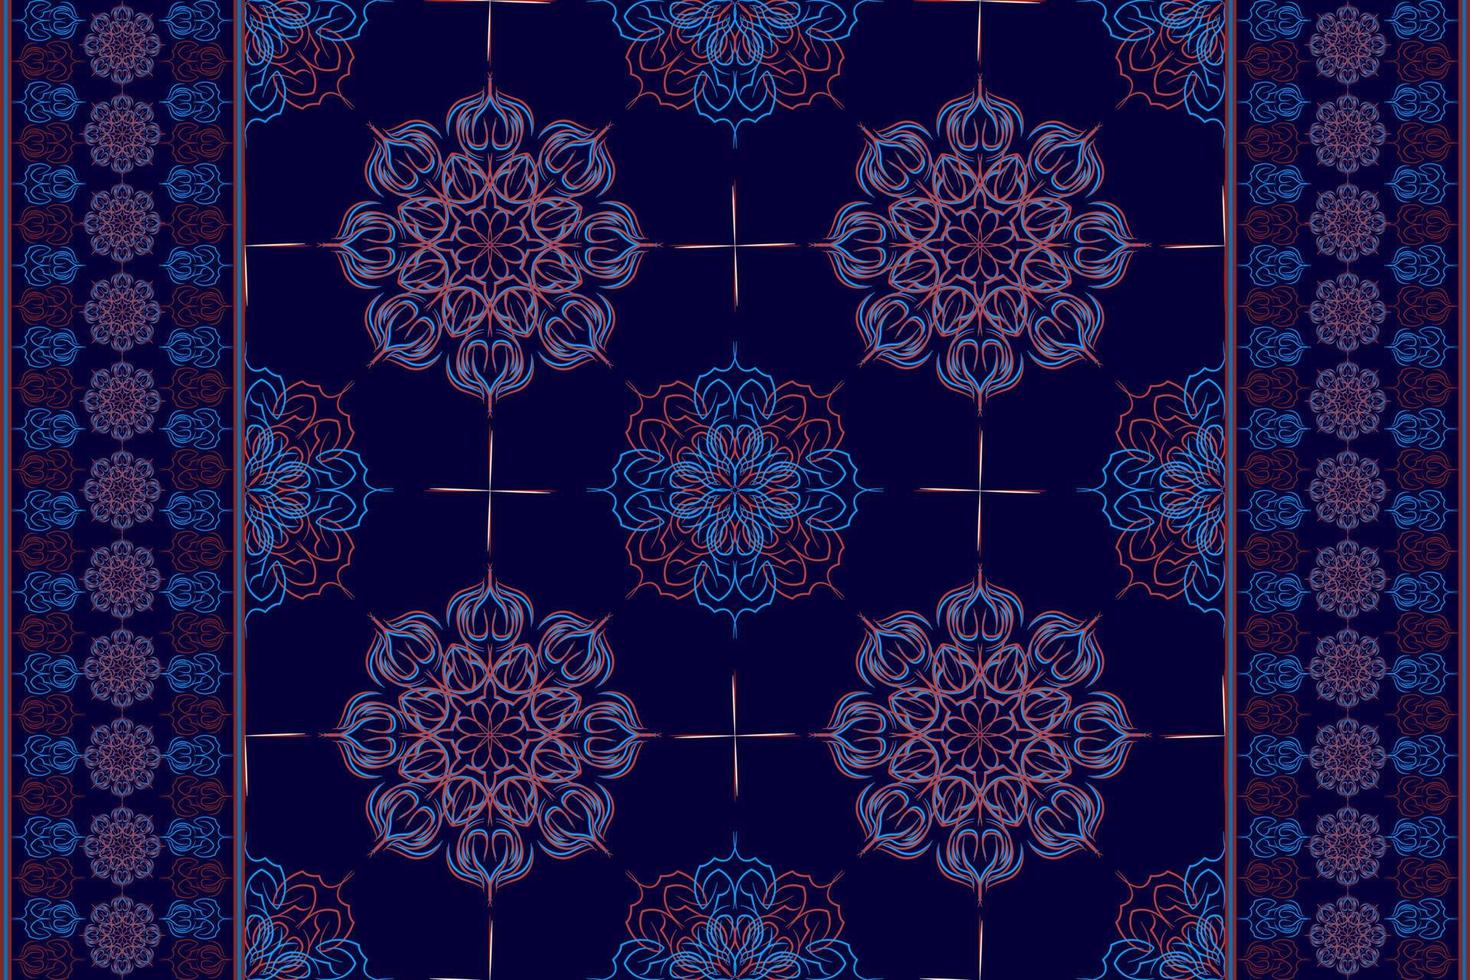 Ethnic folk geometric seamless pattern in flower red and dark blue tone in vector illustration design for fabric, mat, carpet, scarf, wrapping paper, tile and more